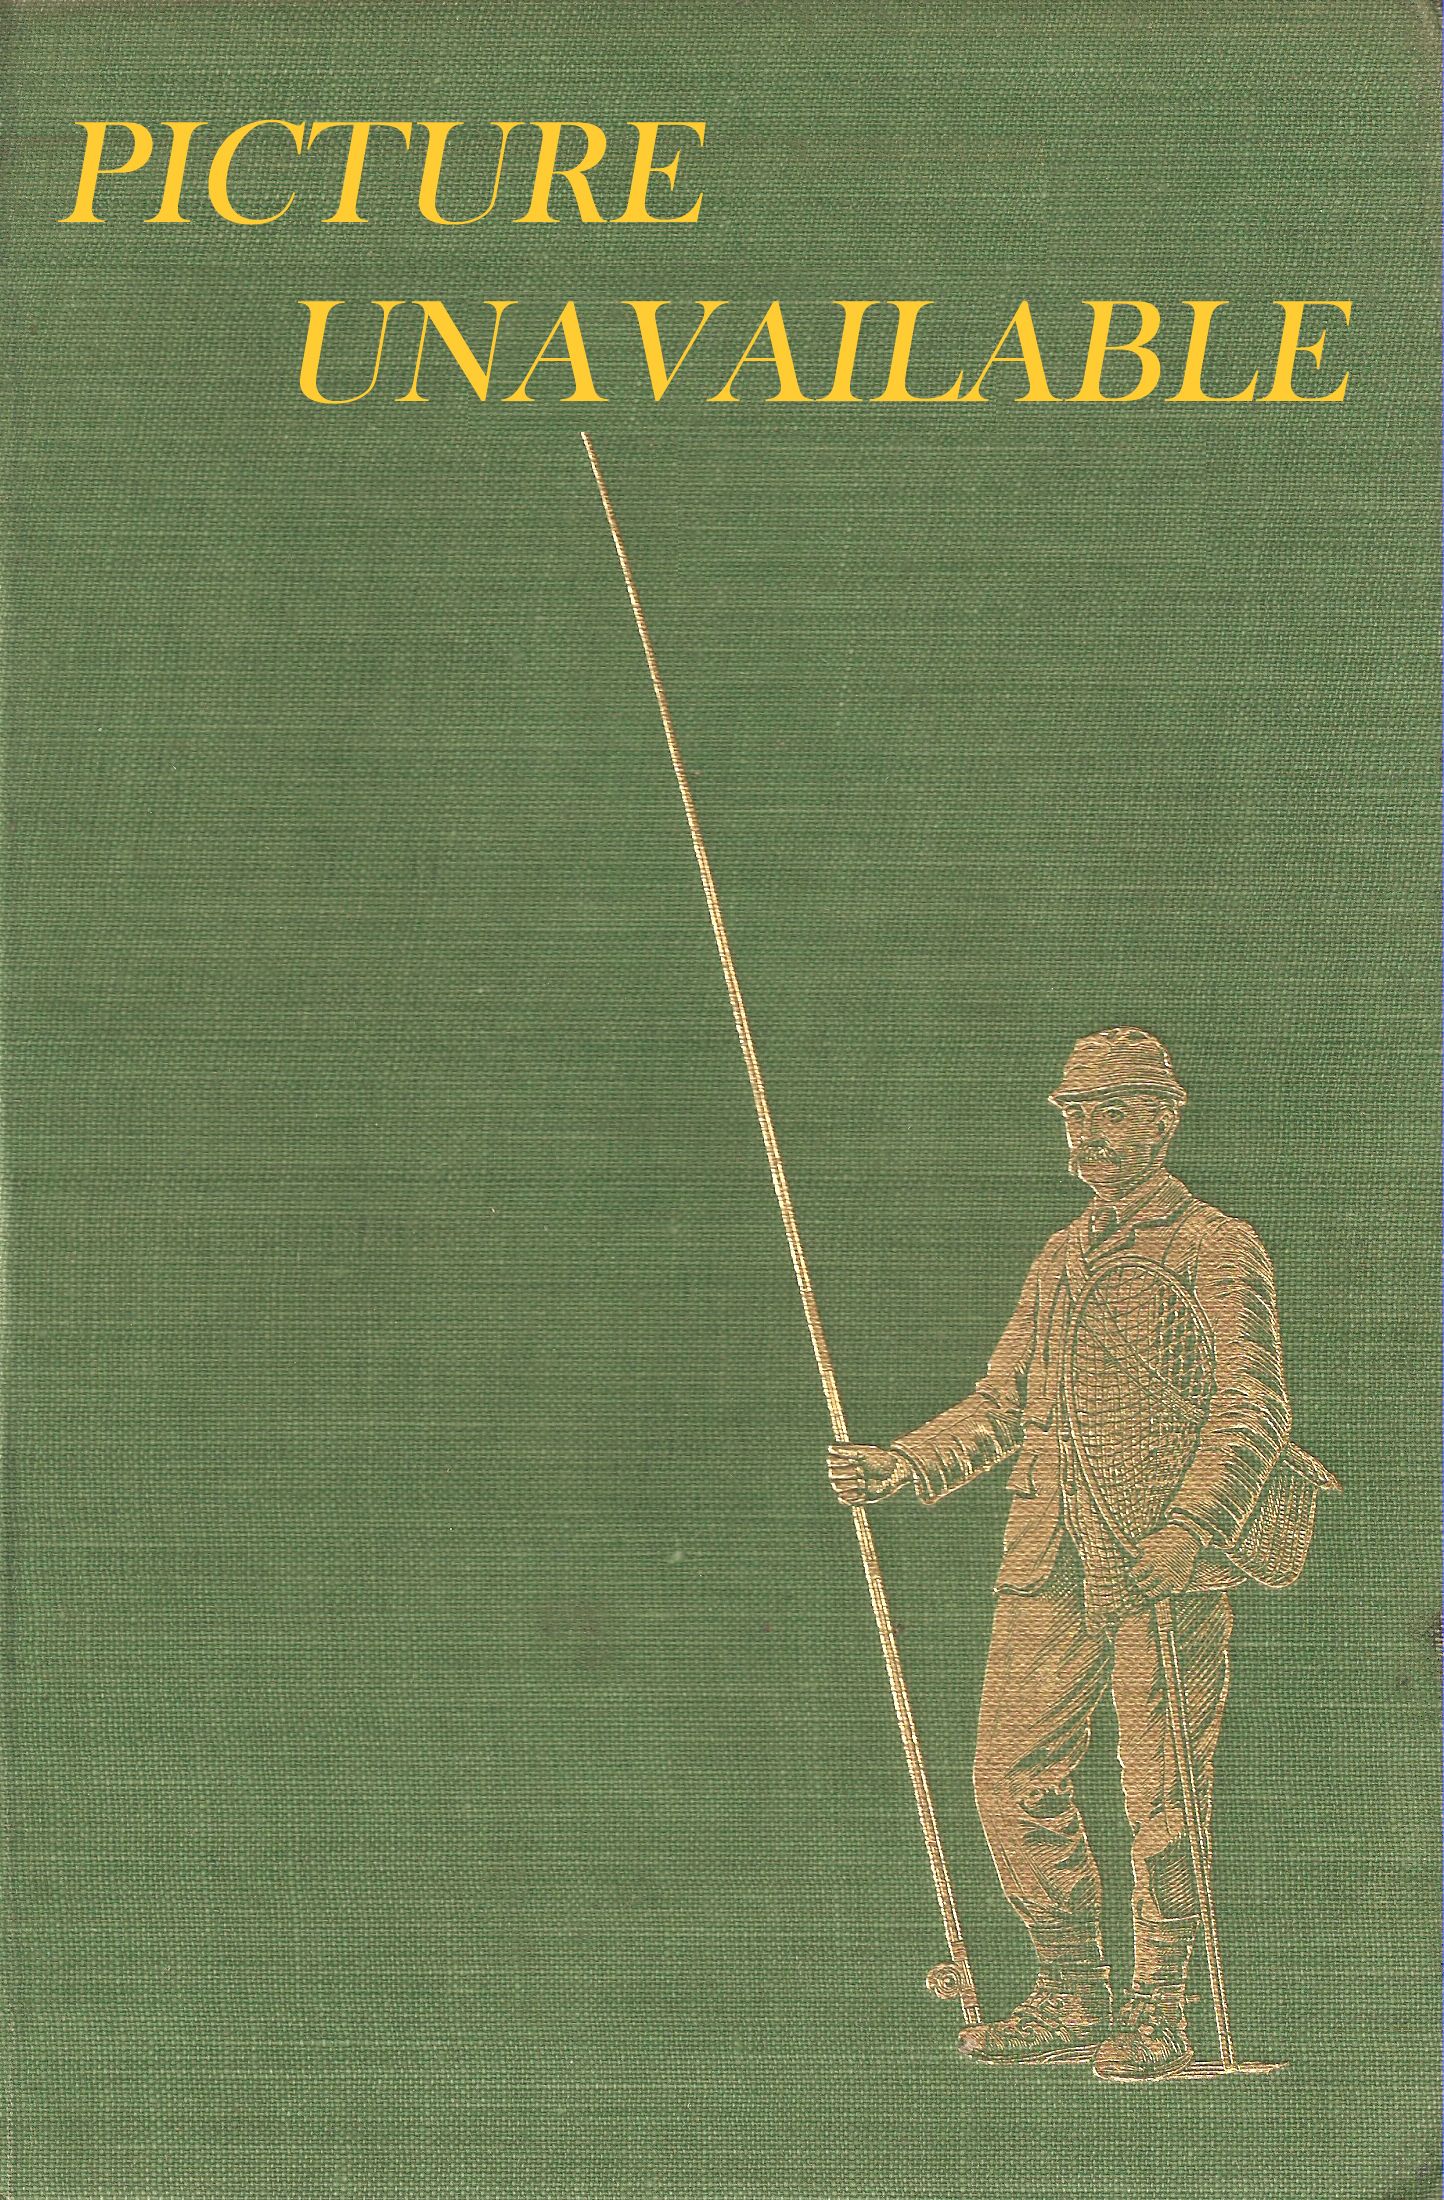 NEW ZEALAND SEA ANGLERS' GUIDE. By R.B. Doogue and J.M. Moreland.  Illustrated by Eric W. Heath.